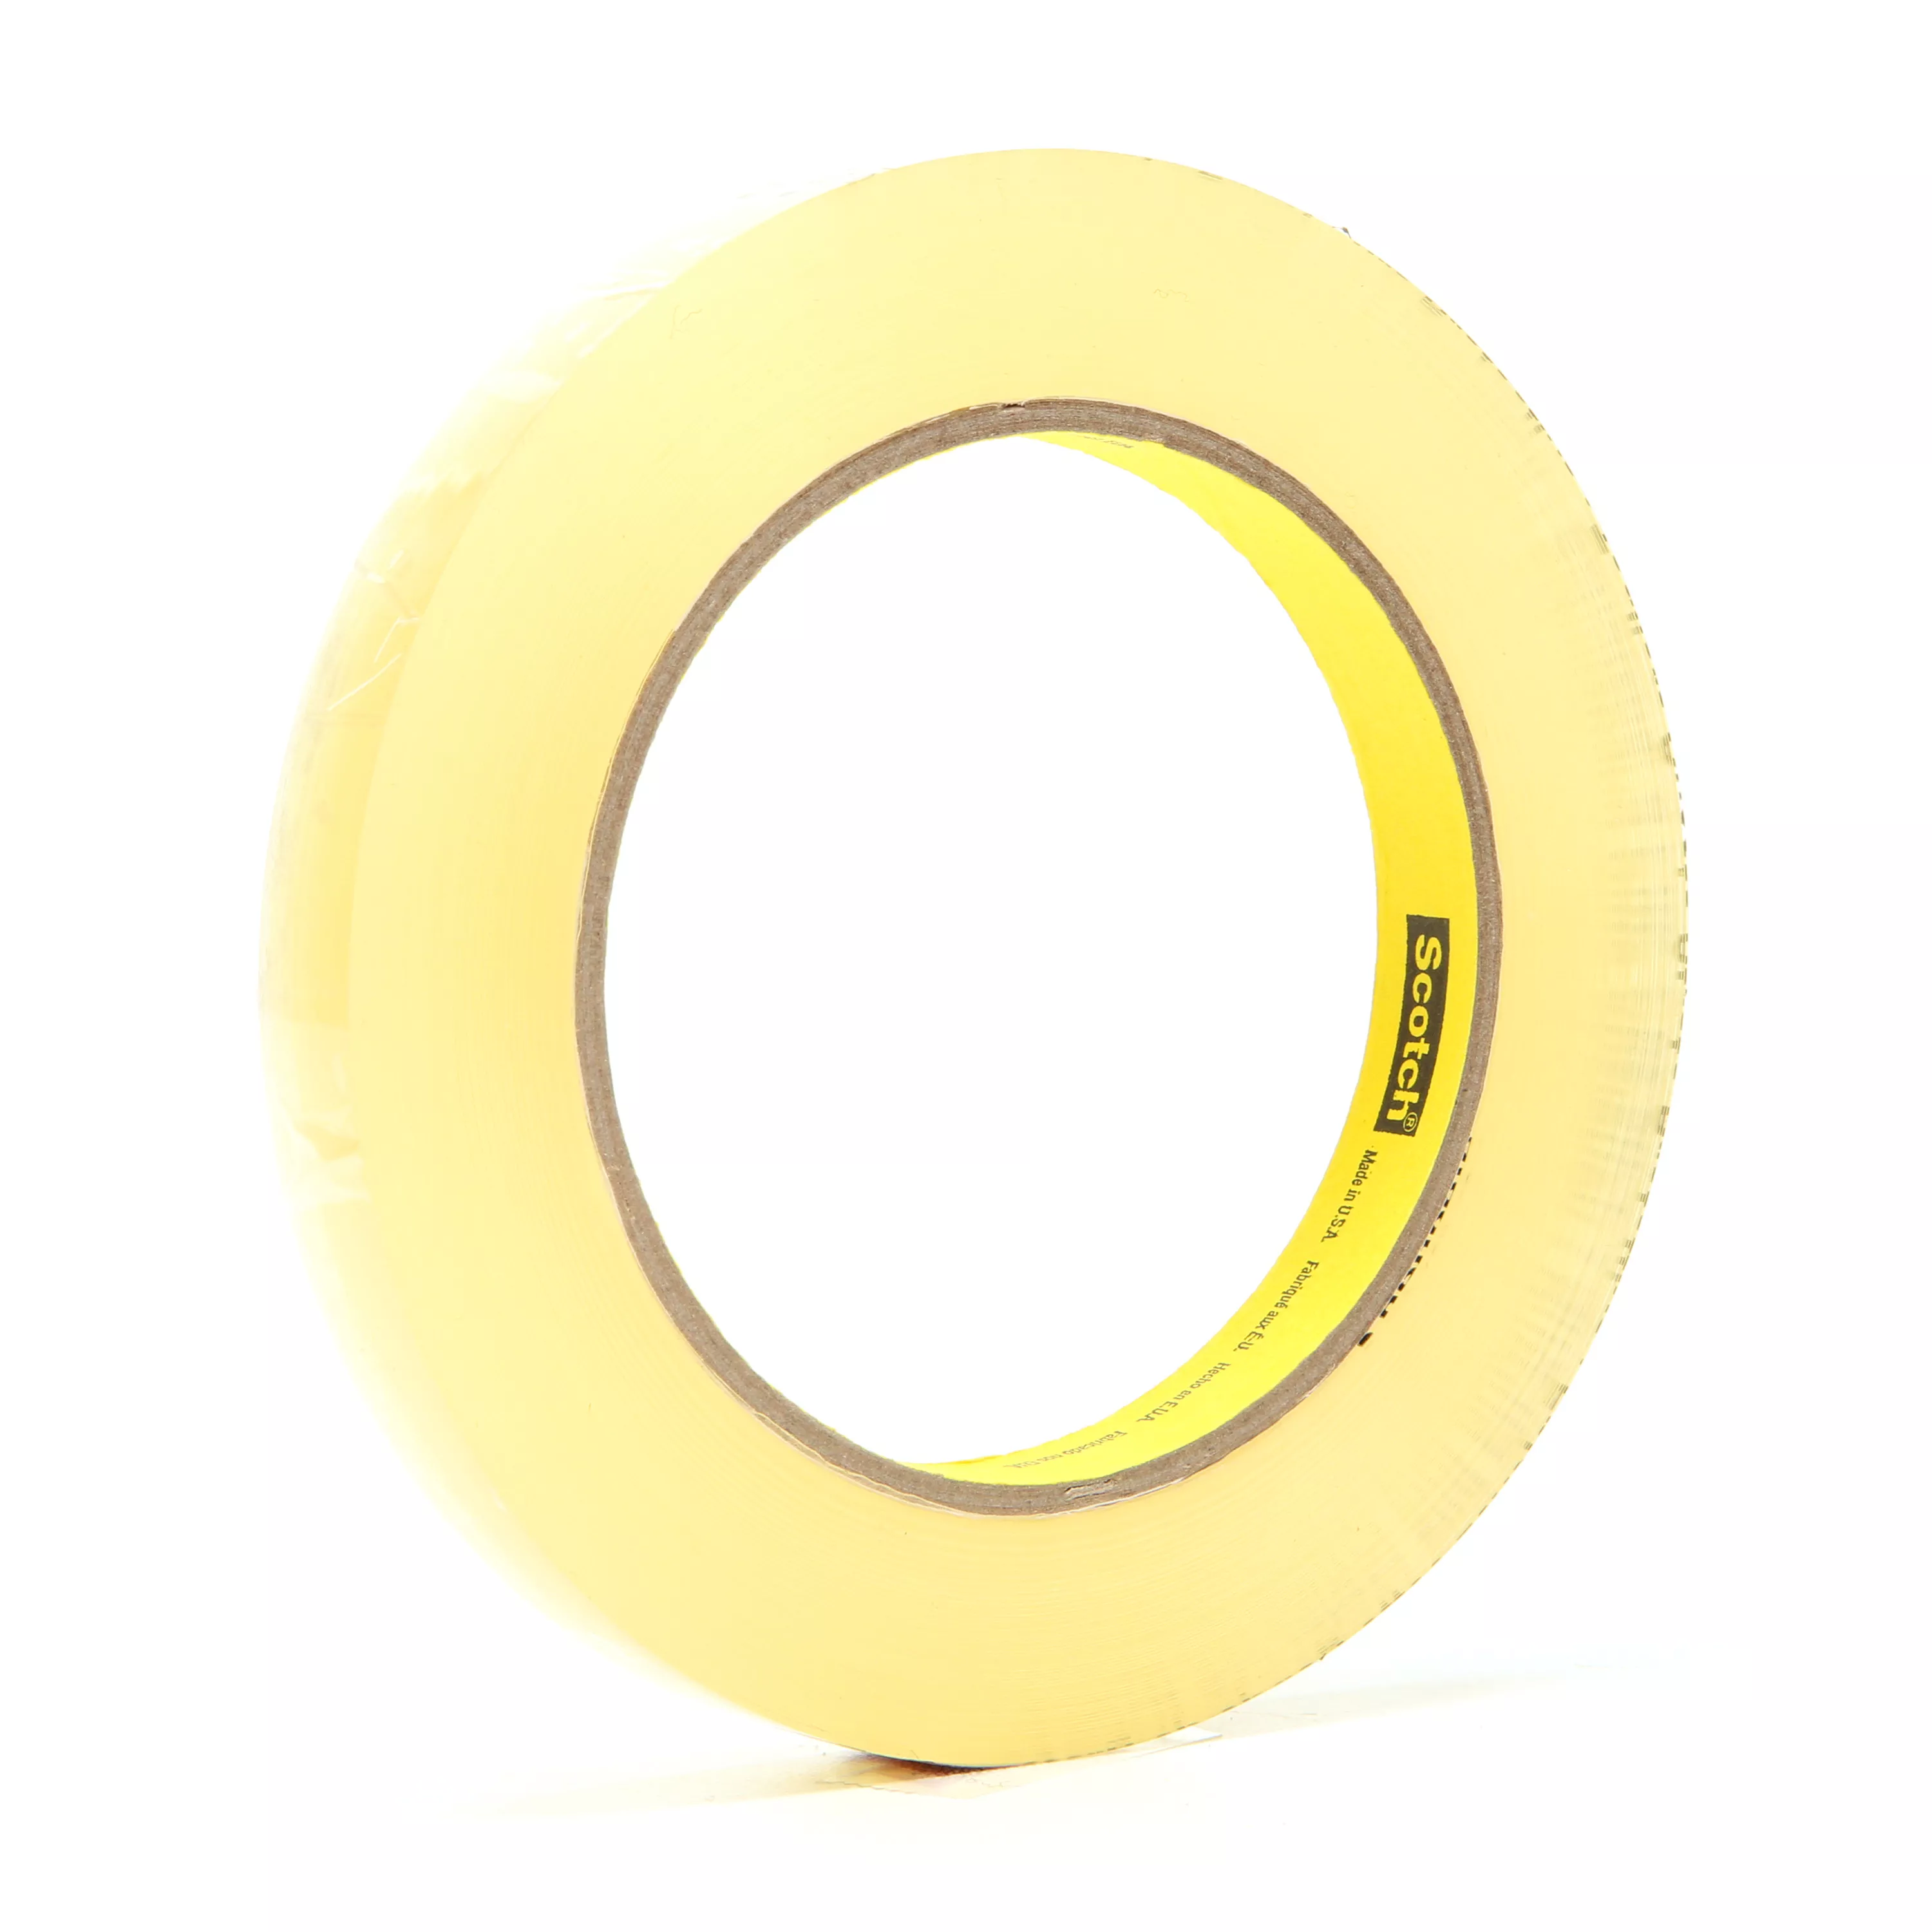 SKU 7000001157 | 3M™ Removable Repositionable Tape 665